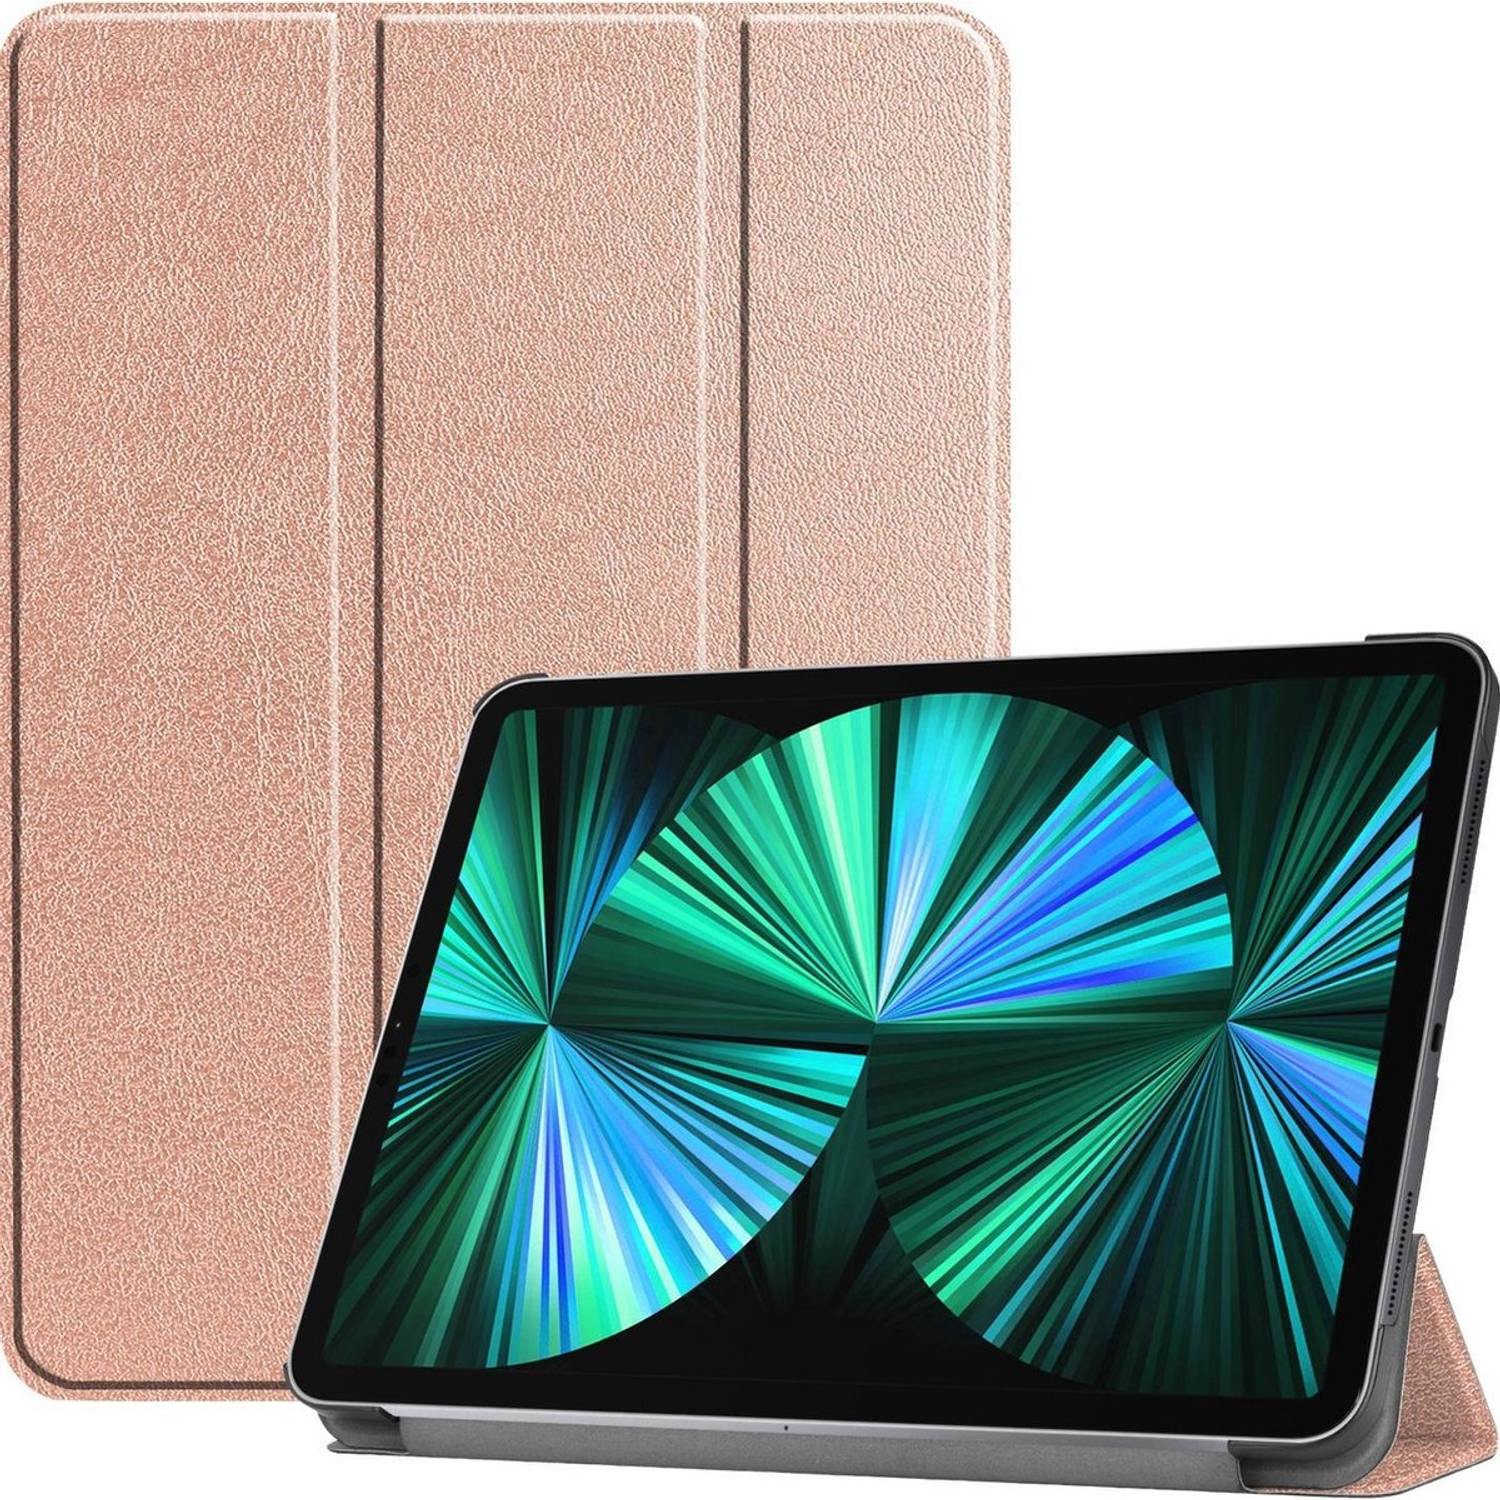 Basey Ipad Pro 2021 12,9 Inch Hoes Case Hoesje Rosé Goud Hardcover Book Case Cover